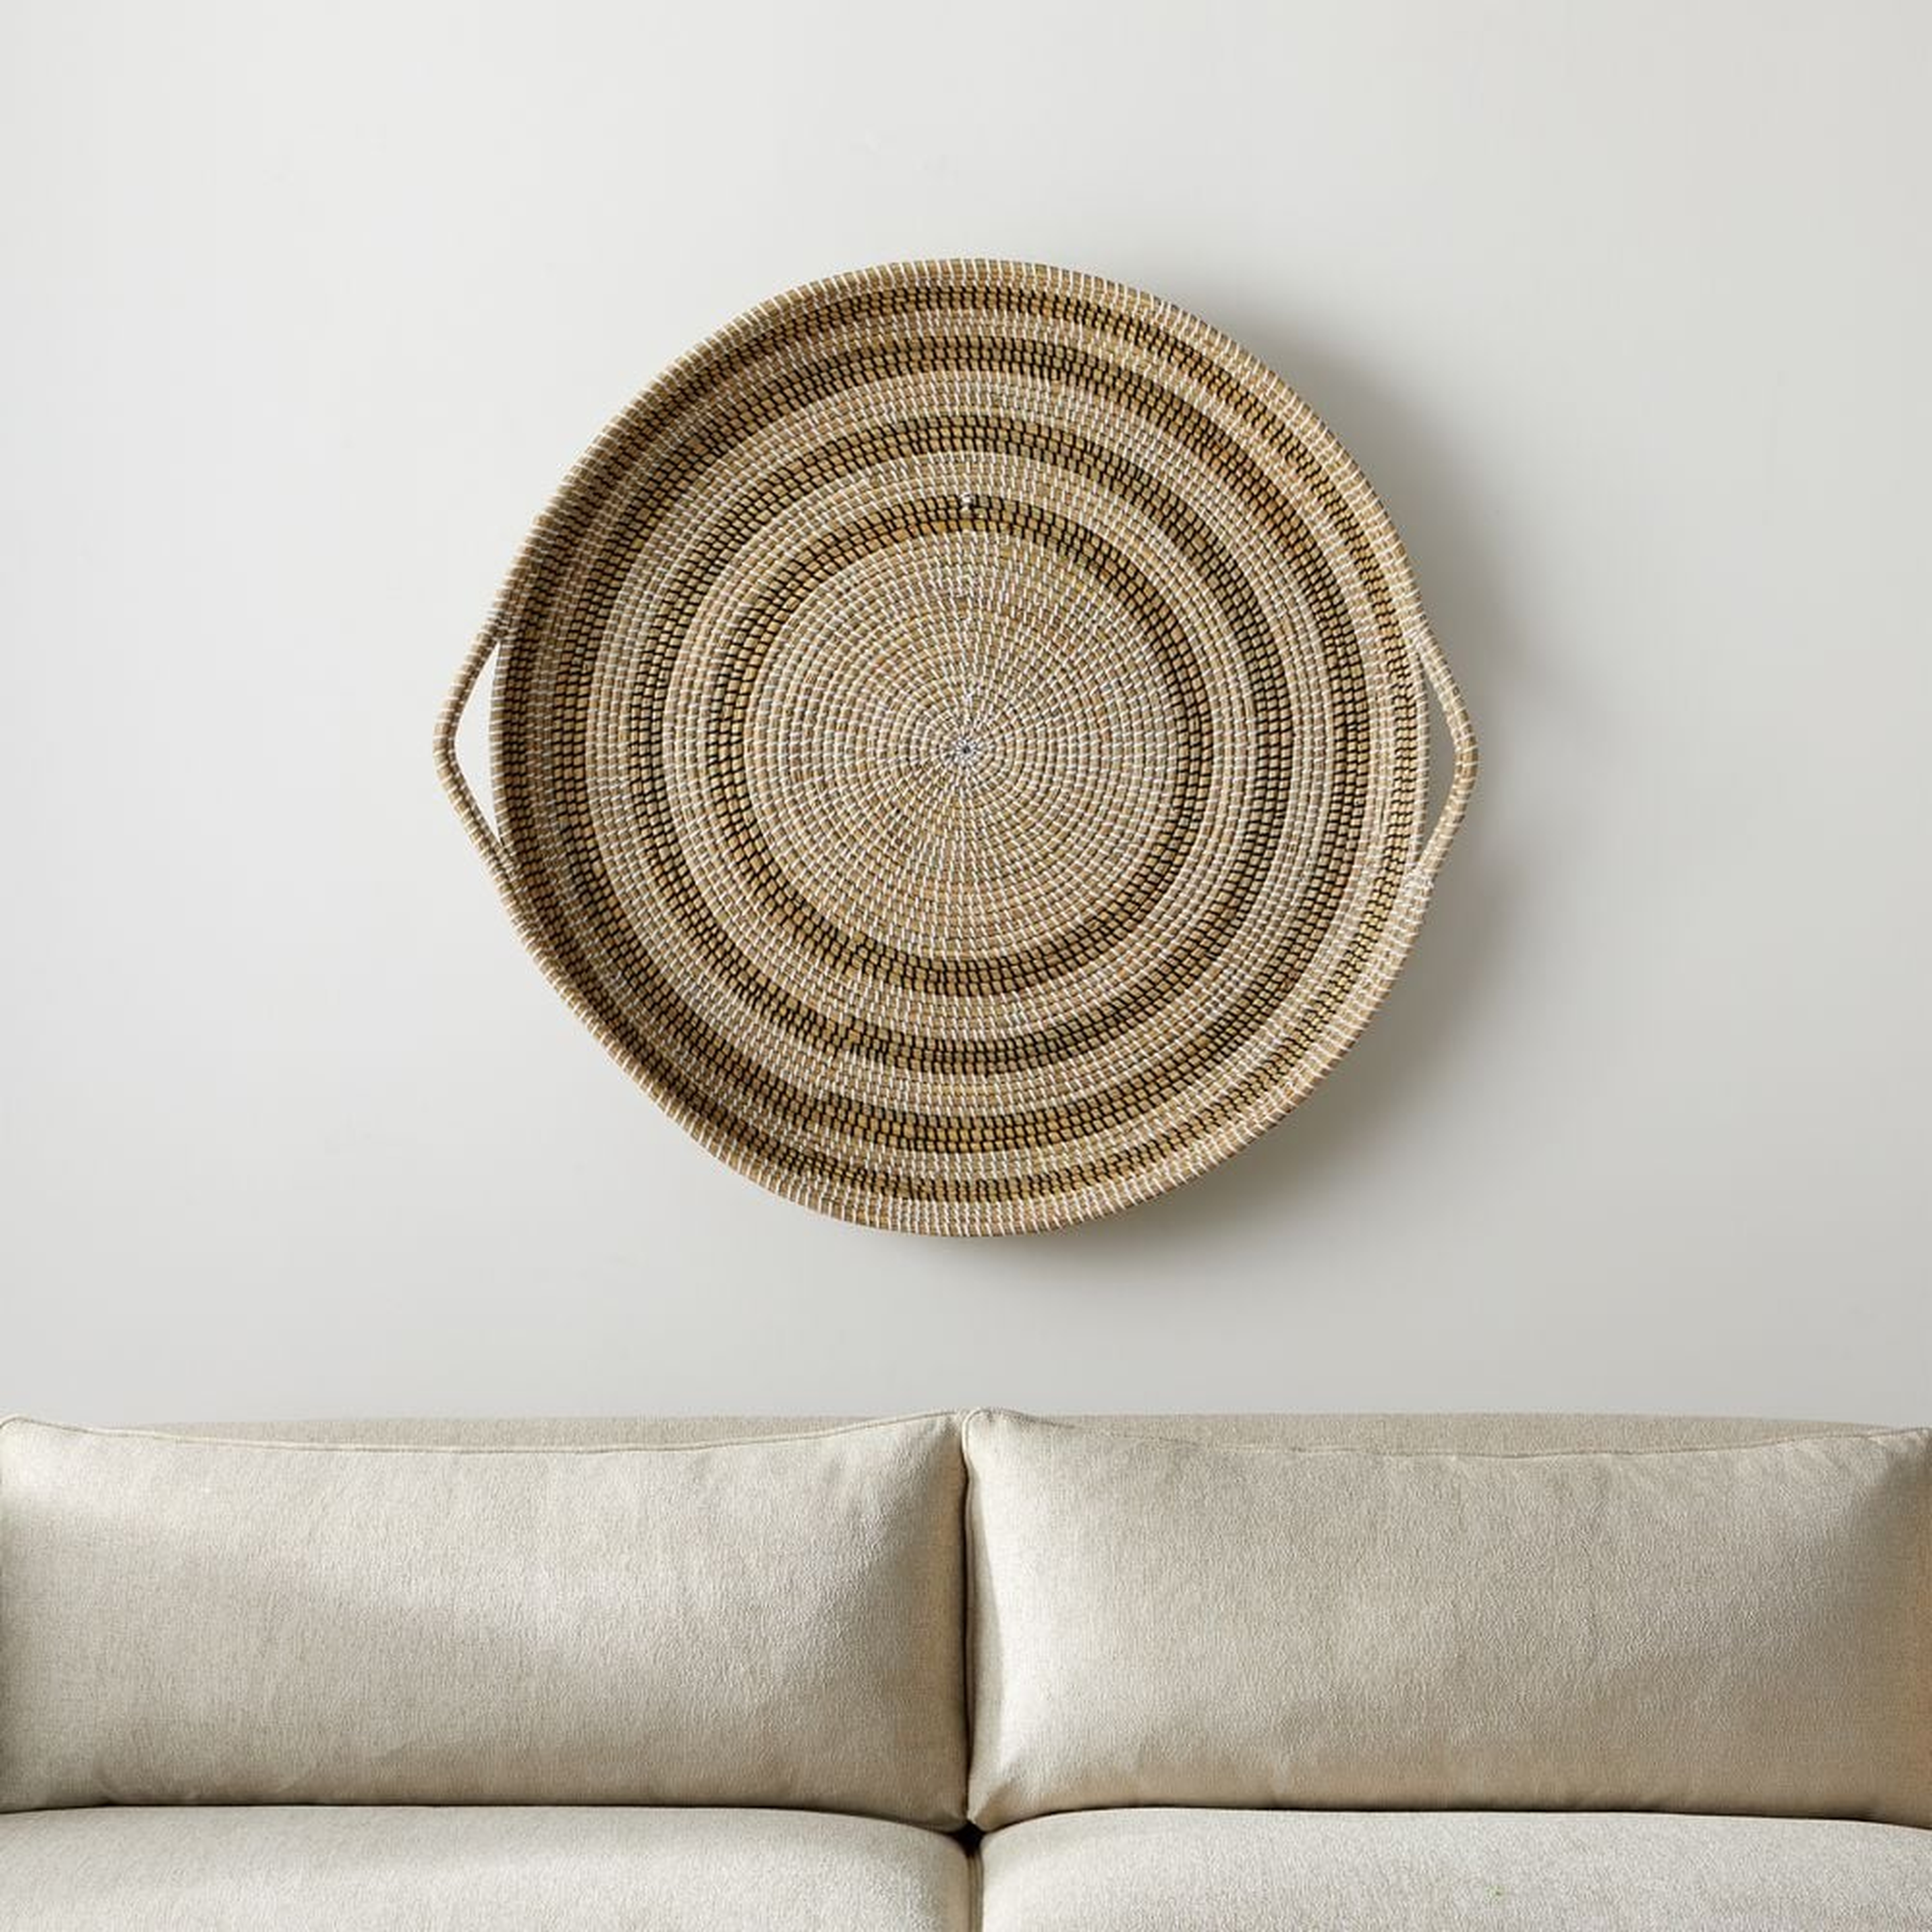 'Dana' Hand-Crafted Round Basket Wall Art 39"x5.9" - Crate and Barrel